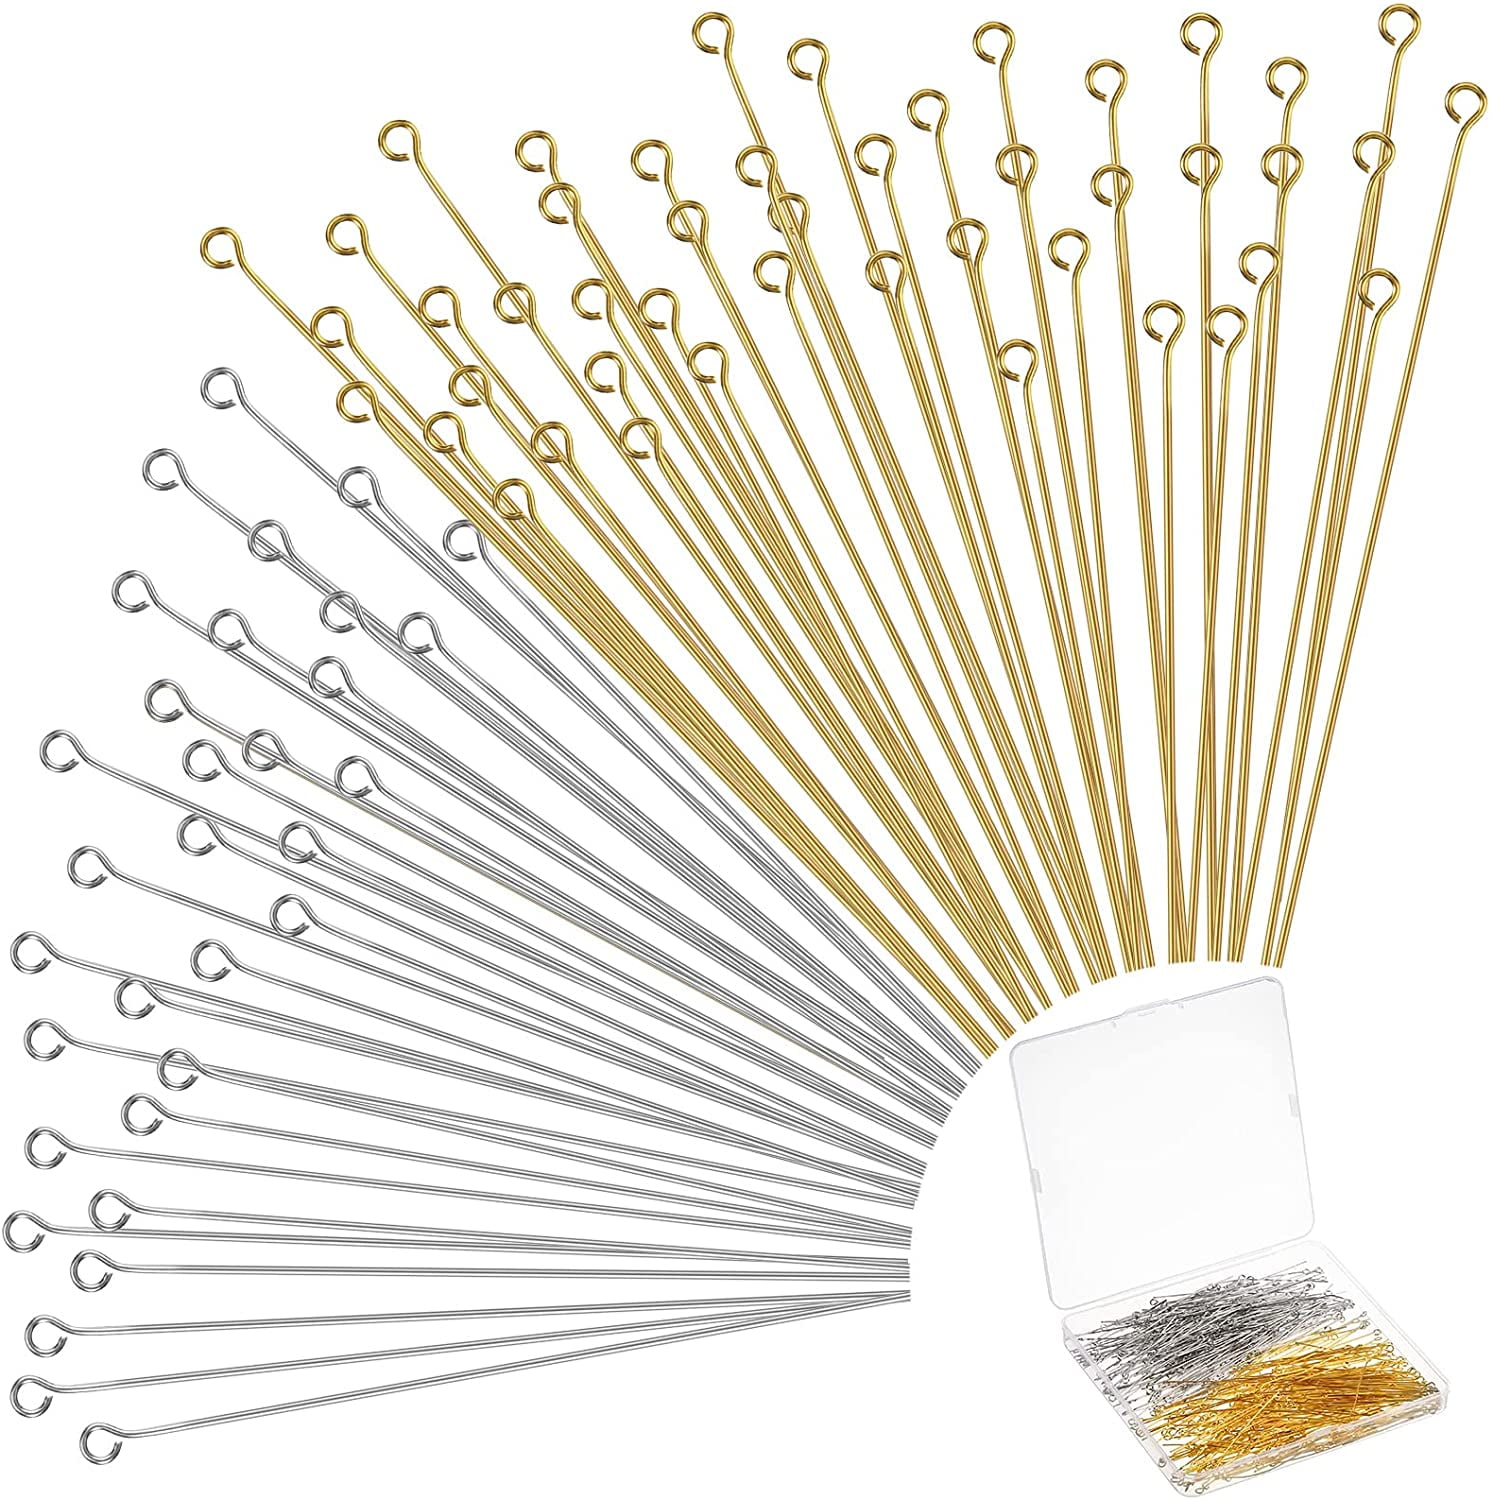 100Pcs/Lot Stainless Steel Headpin Diy Jewelry Accessories